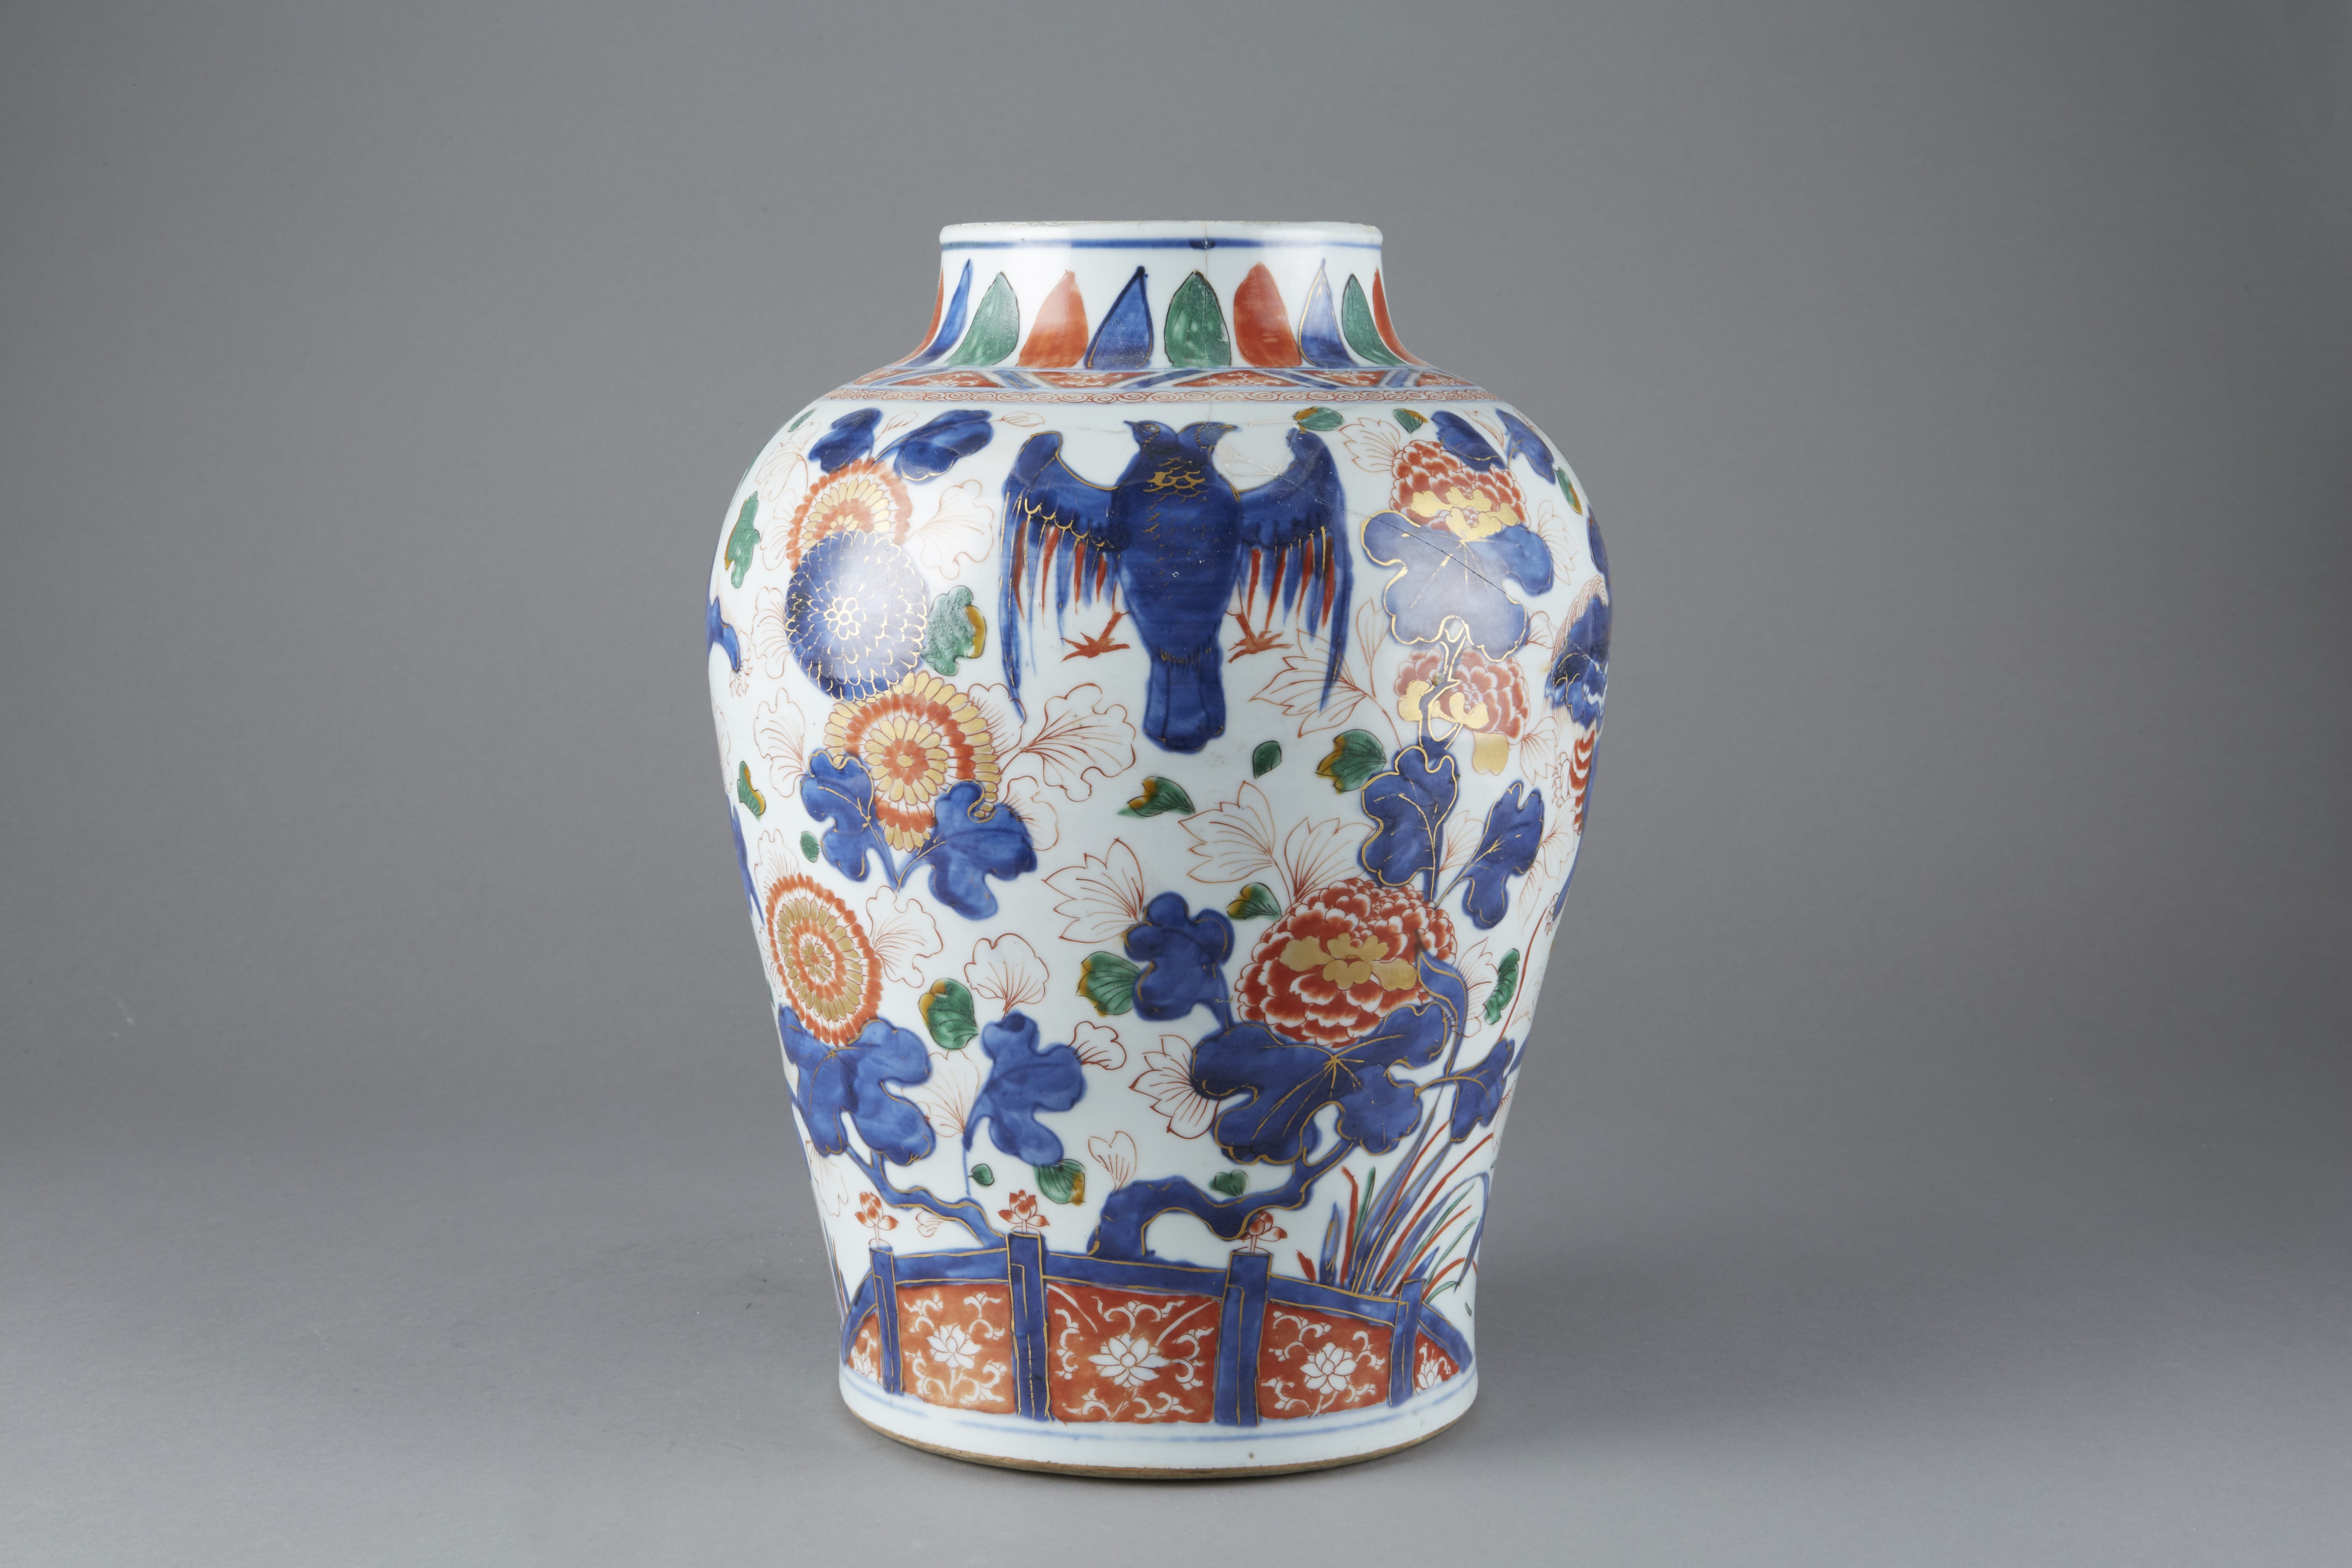 Lot 065: MUSEUM QUALITY CHINESE EXPORT PORCELAIN BALUSTER JAR FOR MEXICAN MARKET - Ming Period